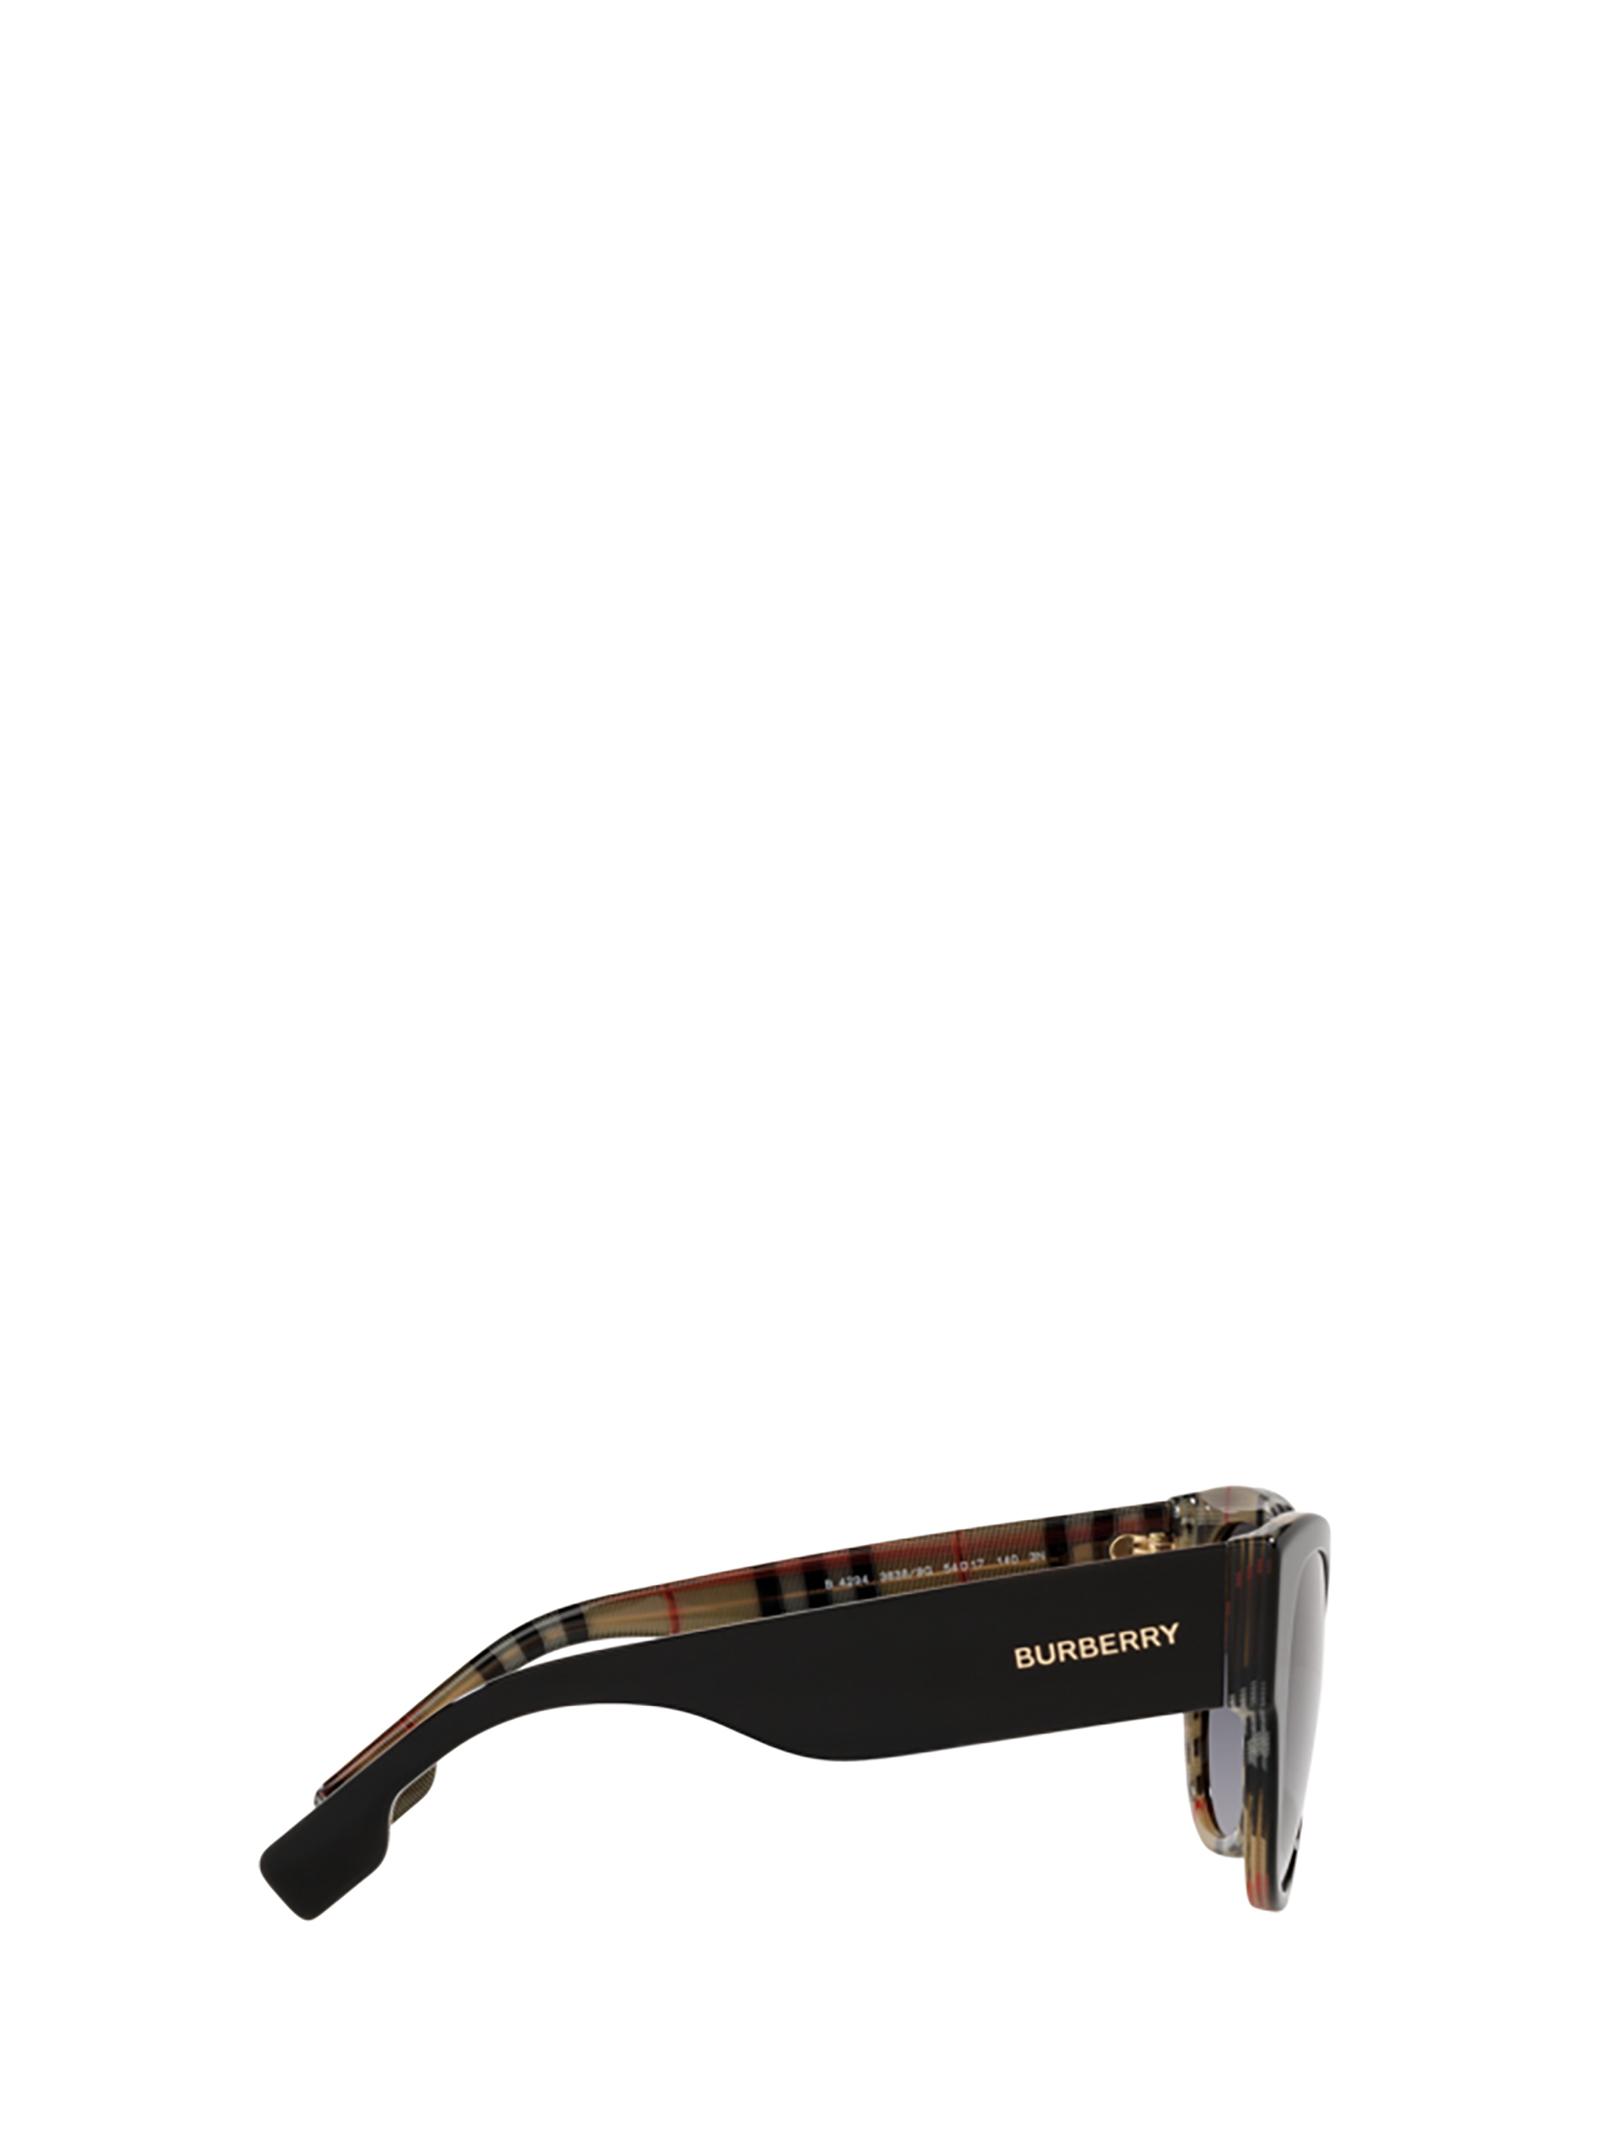 Burberry Be4294 Top Black On Vintage Check Female Sunglasses | Lyst